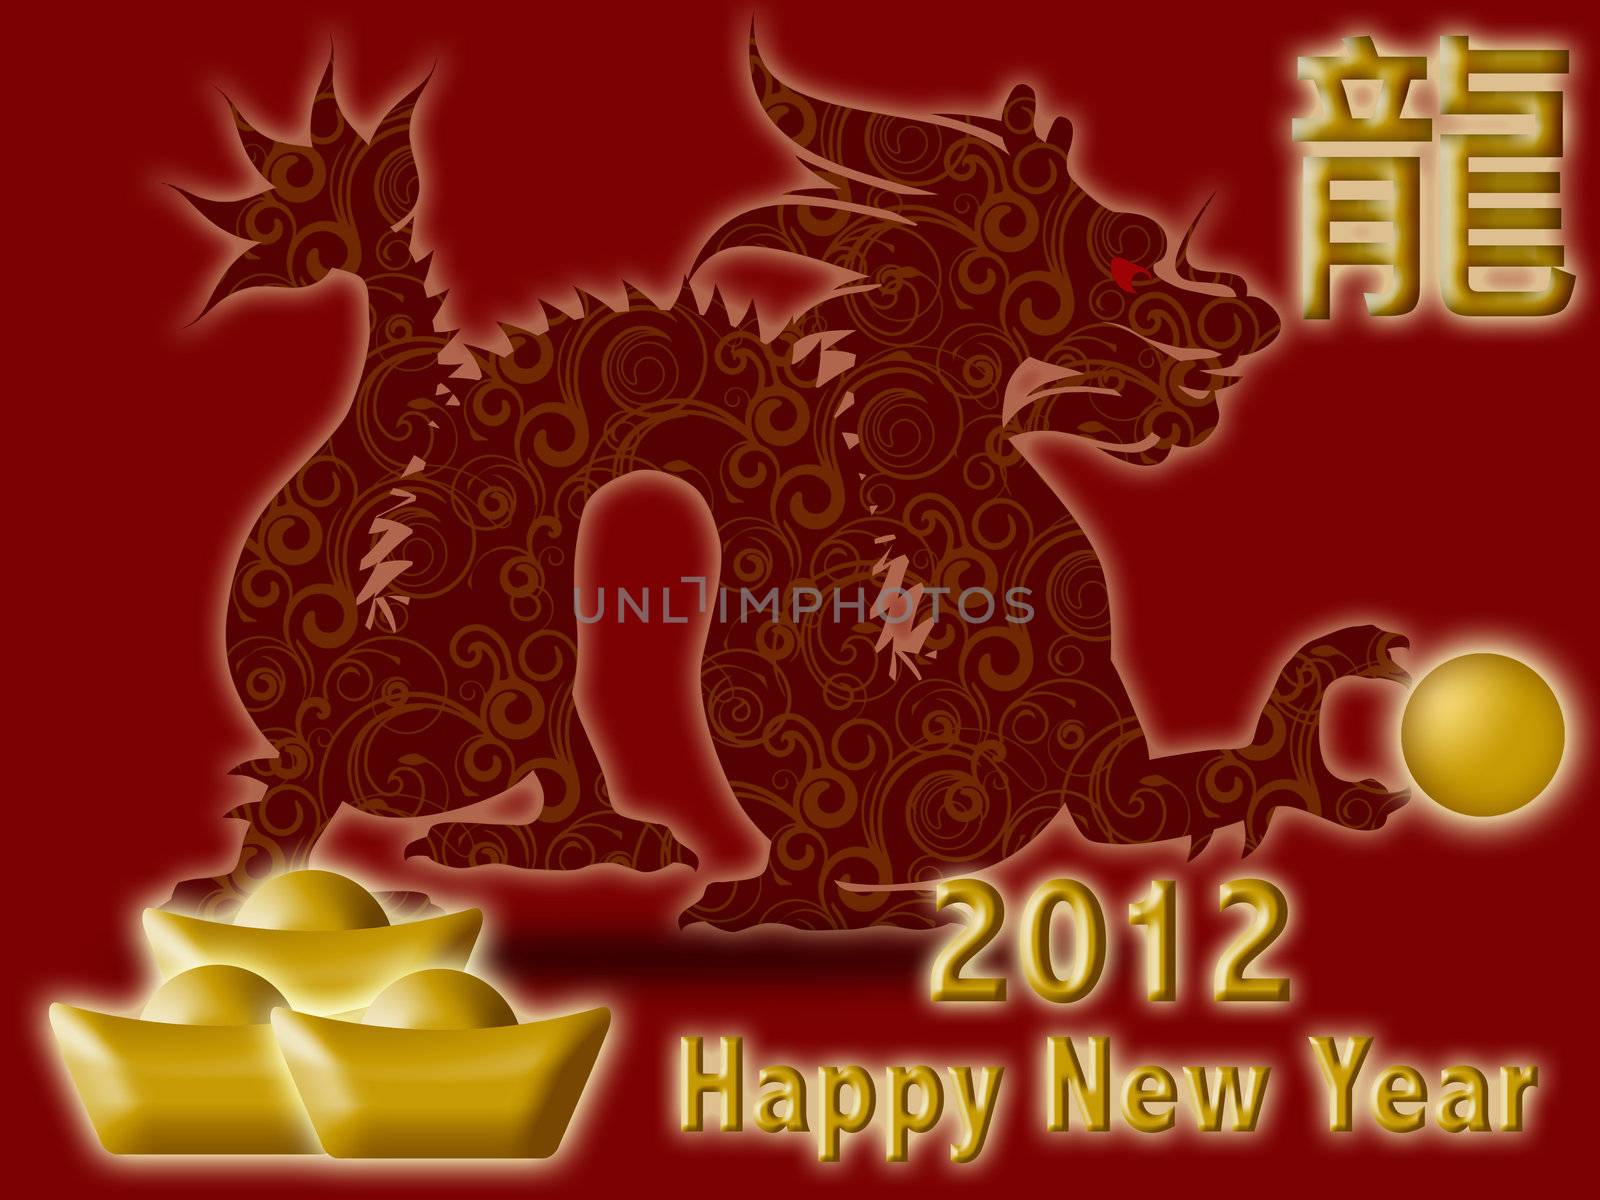 Happy Chinese New Year 2012 with Dragon and Calligraphy Symbol Illustration on Red